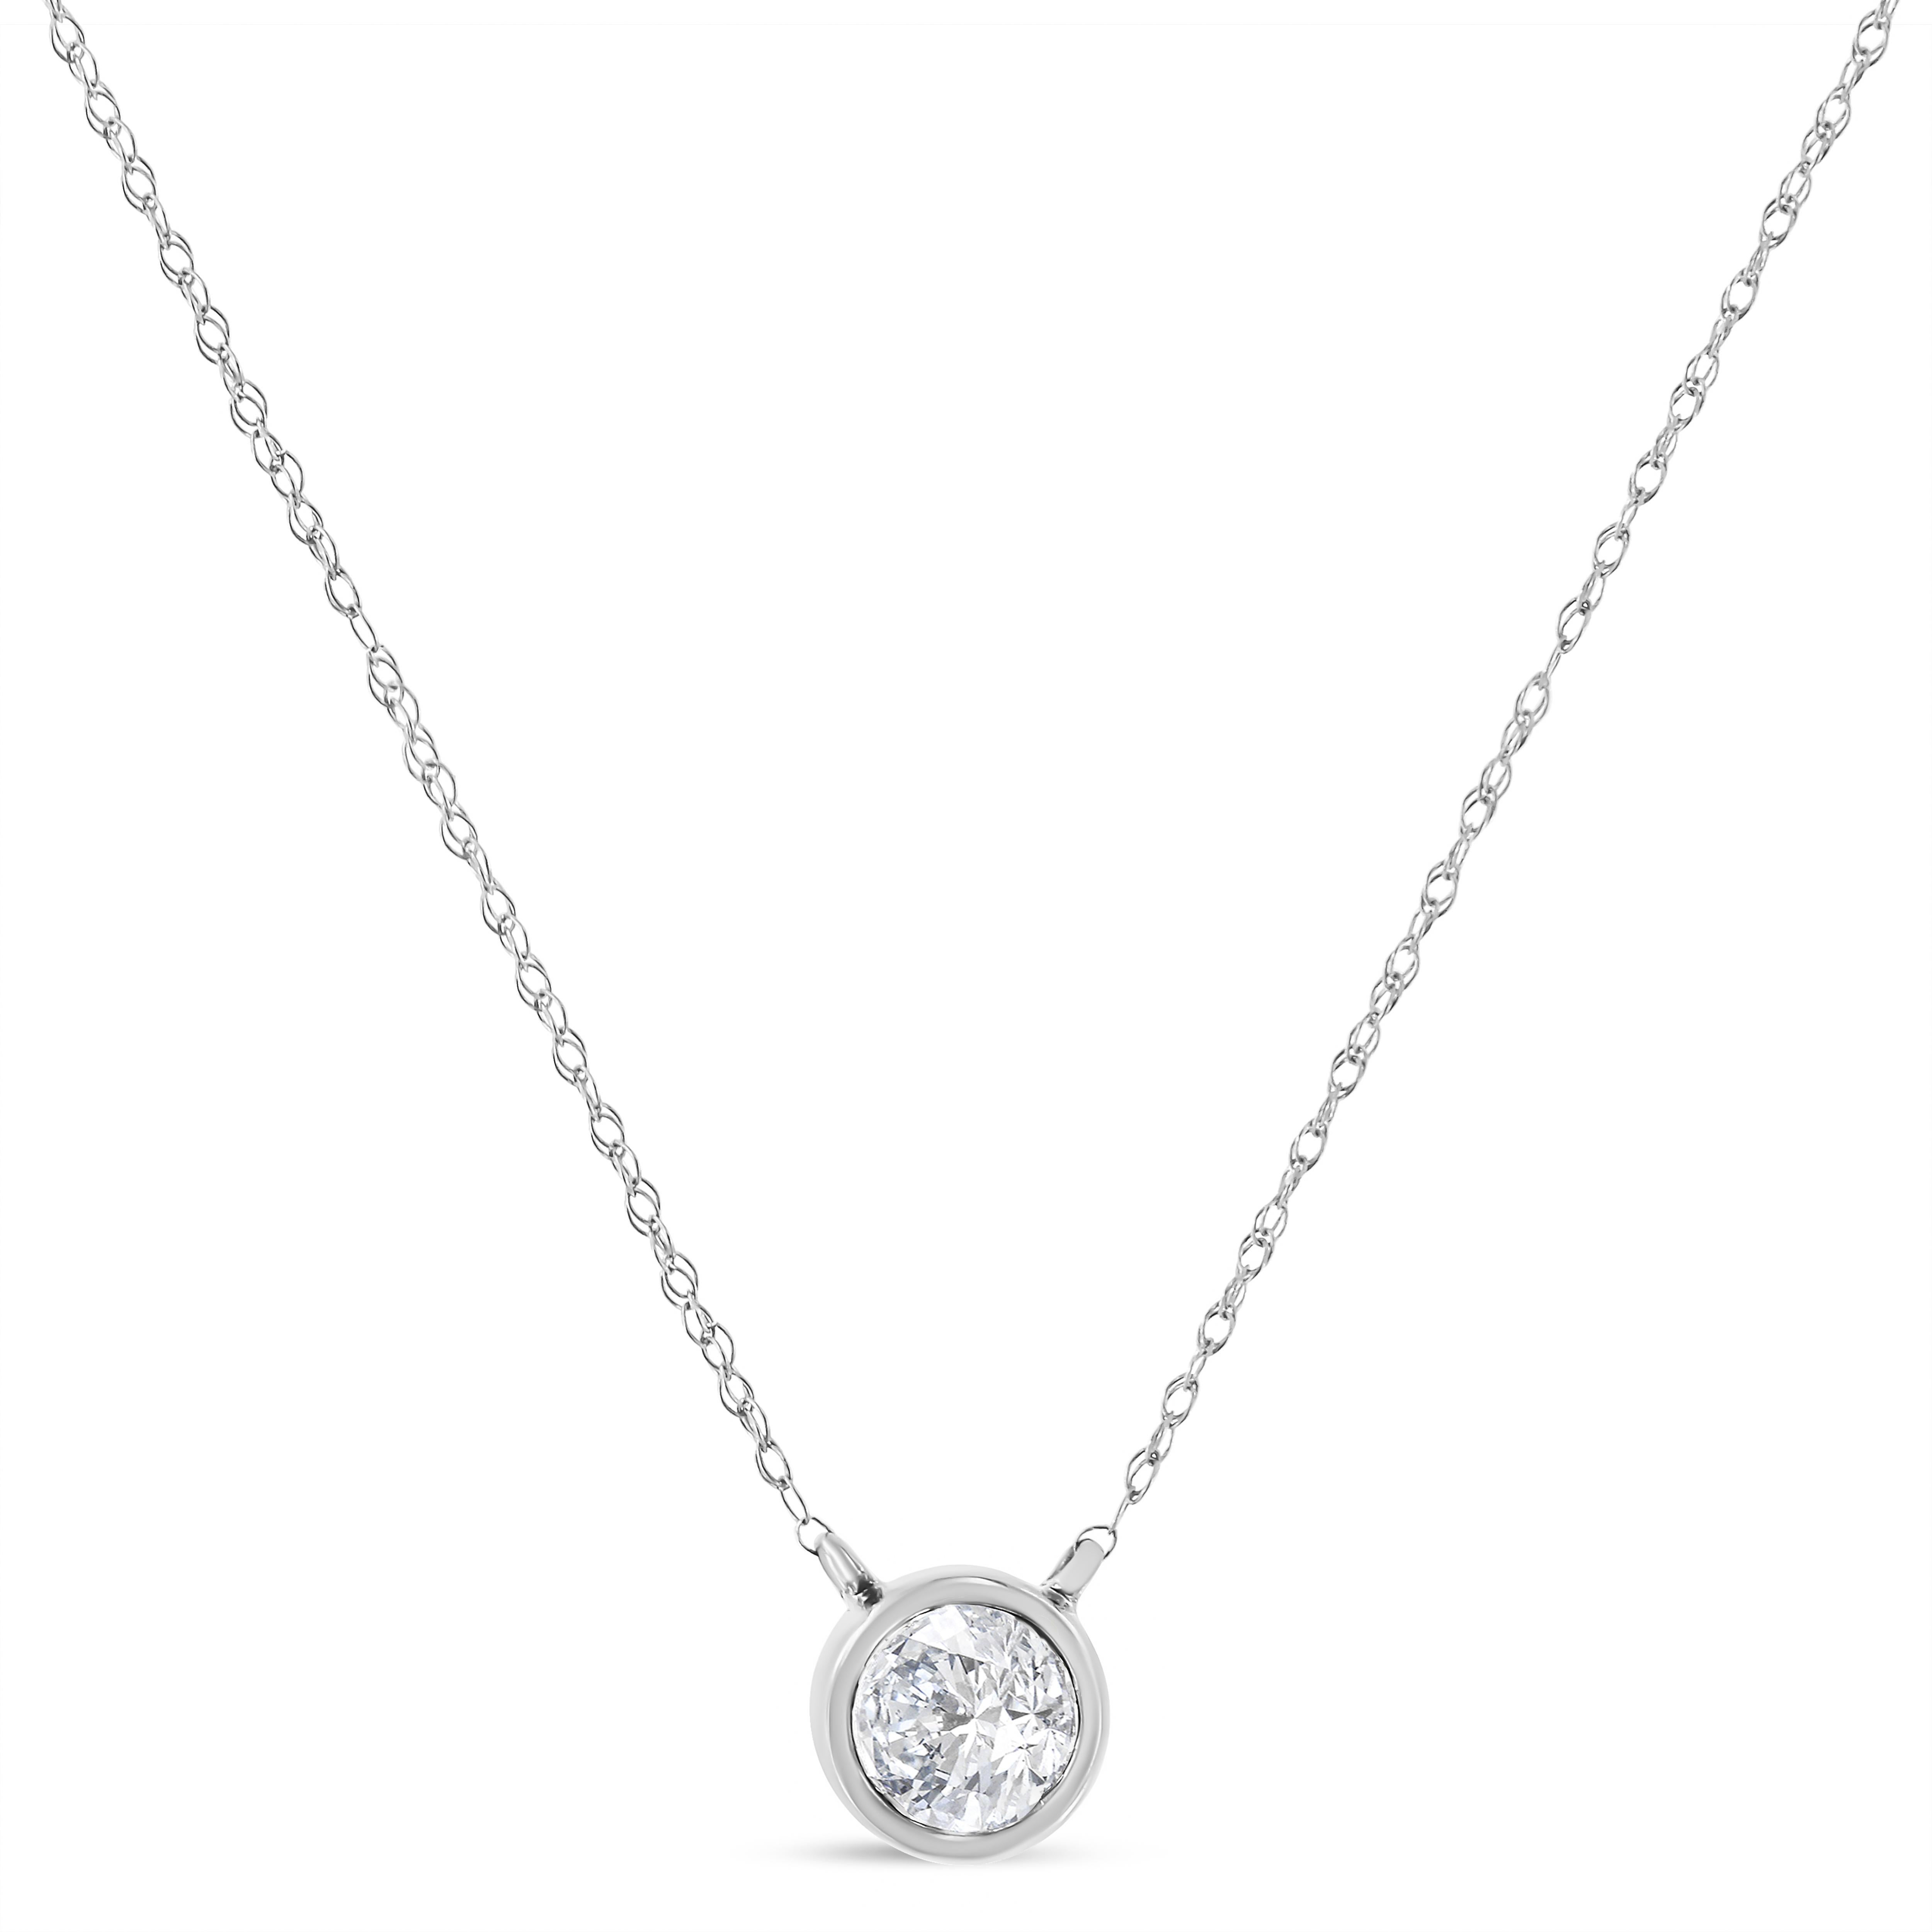 Some things shouldn't be reinvented, which is why we created the solitaire diamond necklace. This understated yet dazzling diamond-forward piece the perfect way to highlight every big occasion, transition, and personal achievement in your life. This